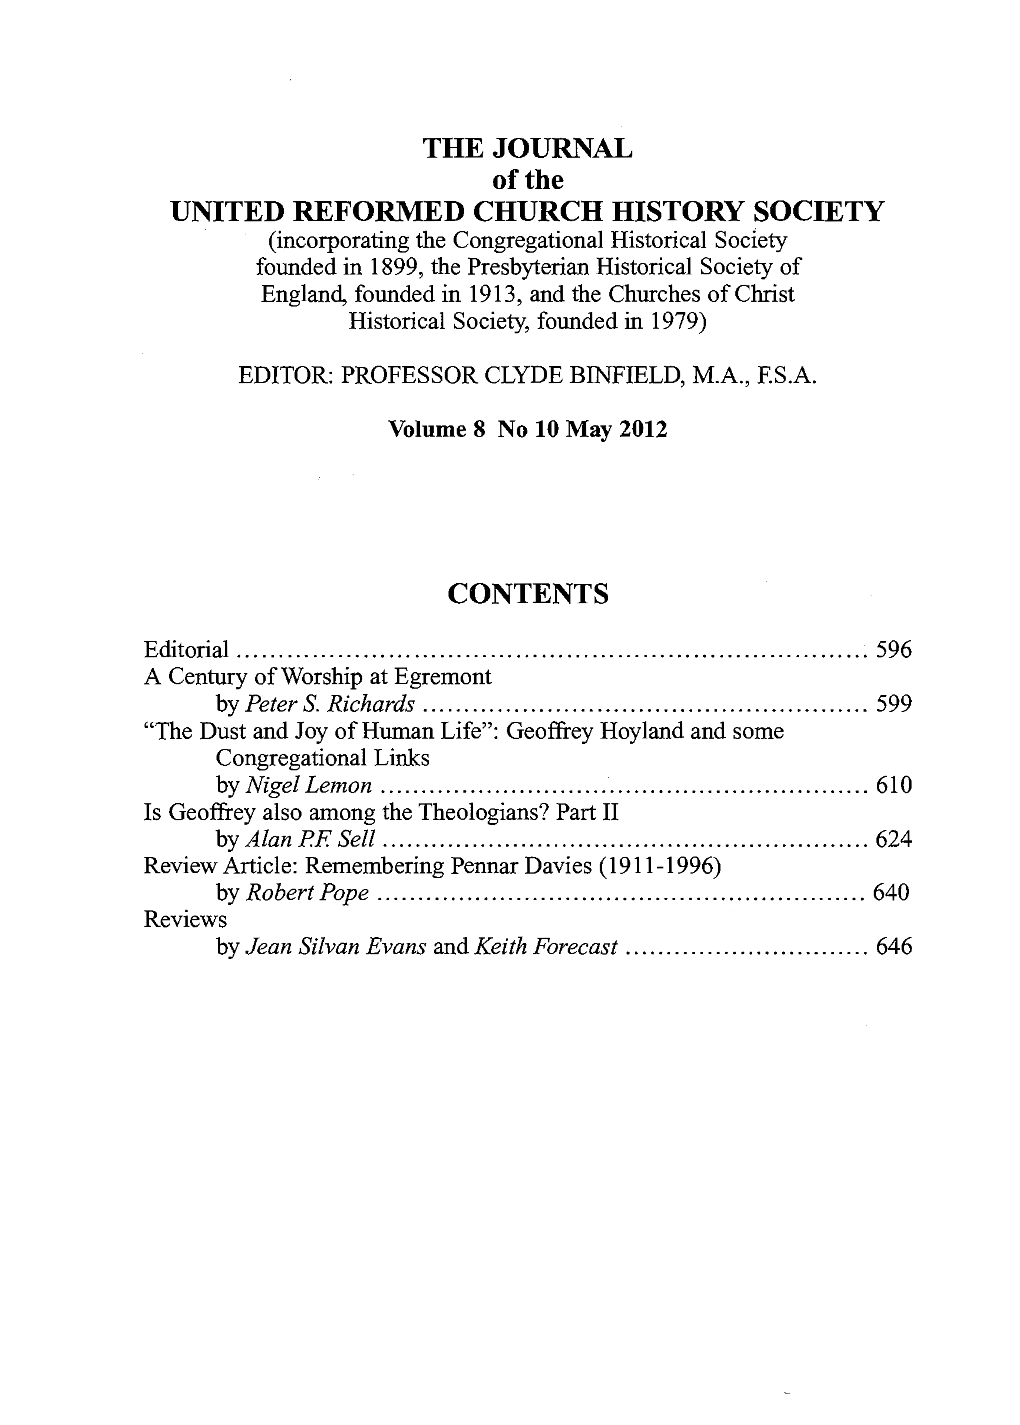 THE JOURNAL of the UNITED REFORMED CHURCH HISTORY SOCIETY CONTENTS